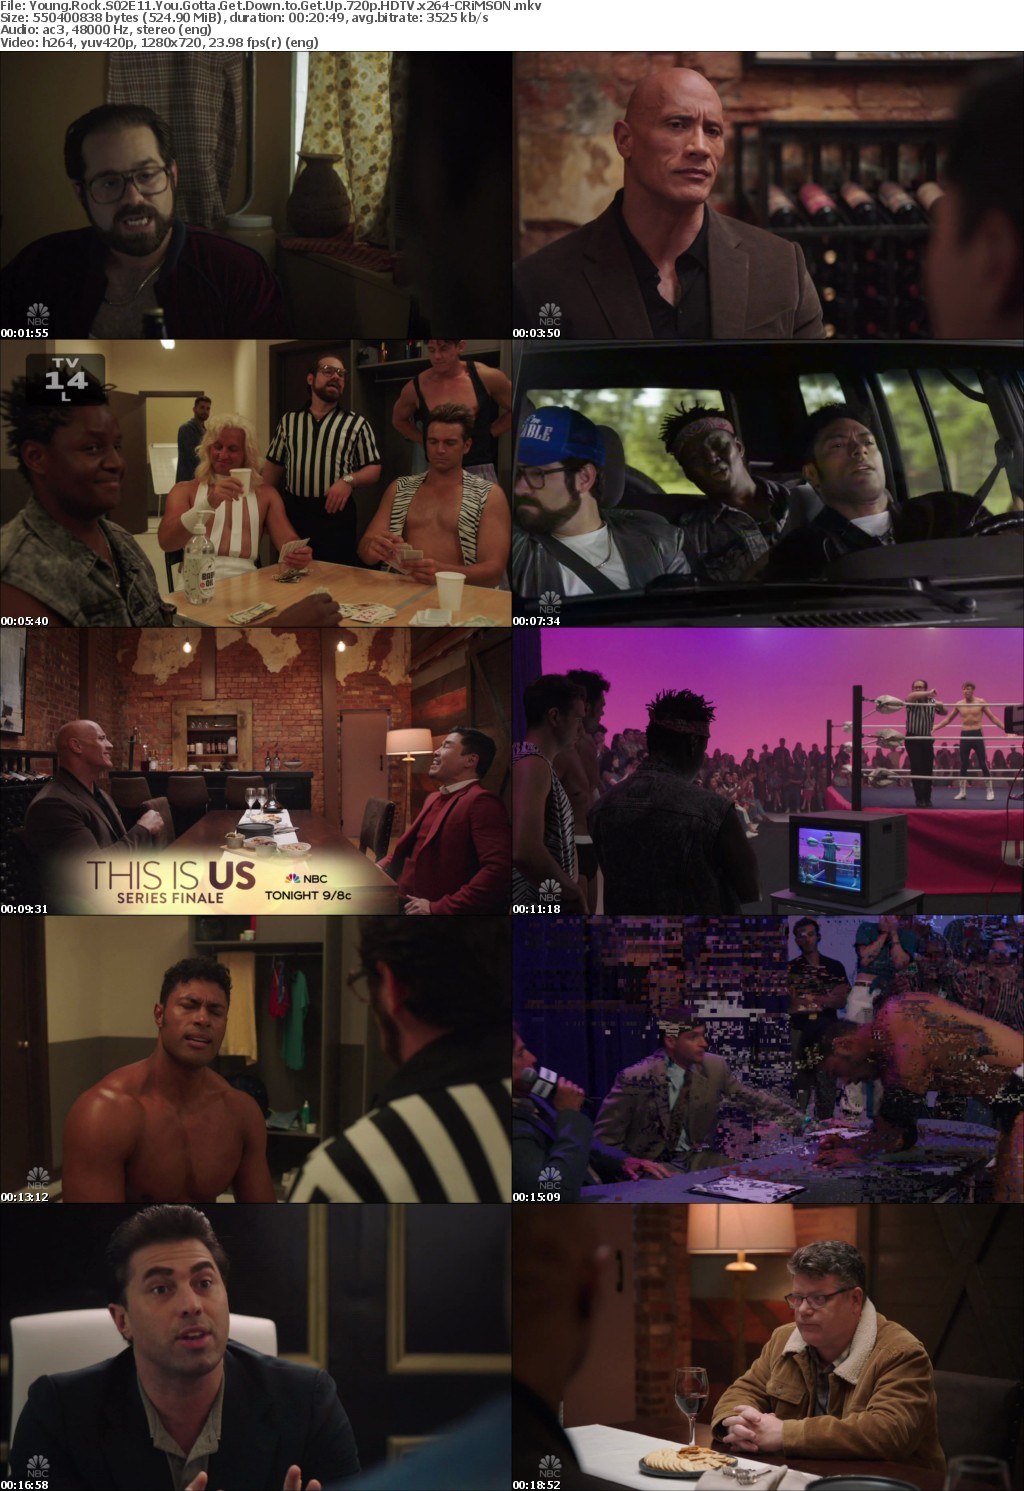 Young Rock S02E11 You Gotta Get Down to Get Up 720p HDTV x264-CRiMSON